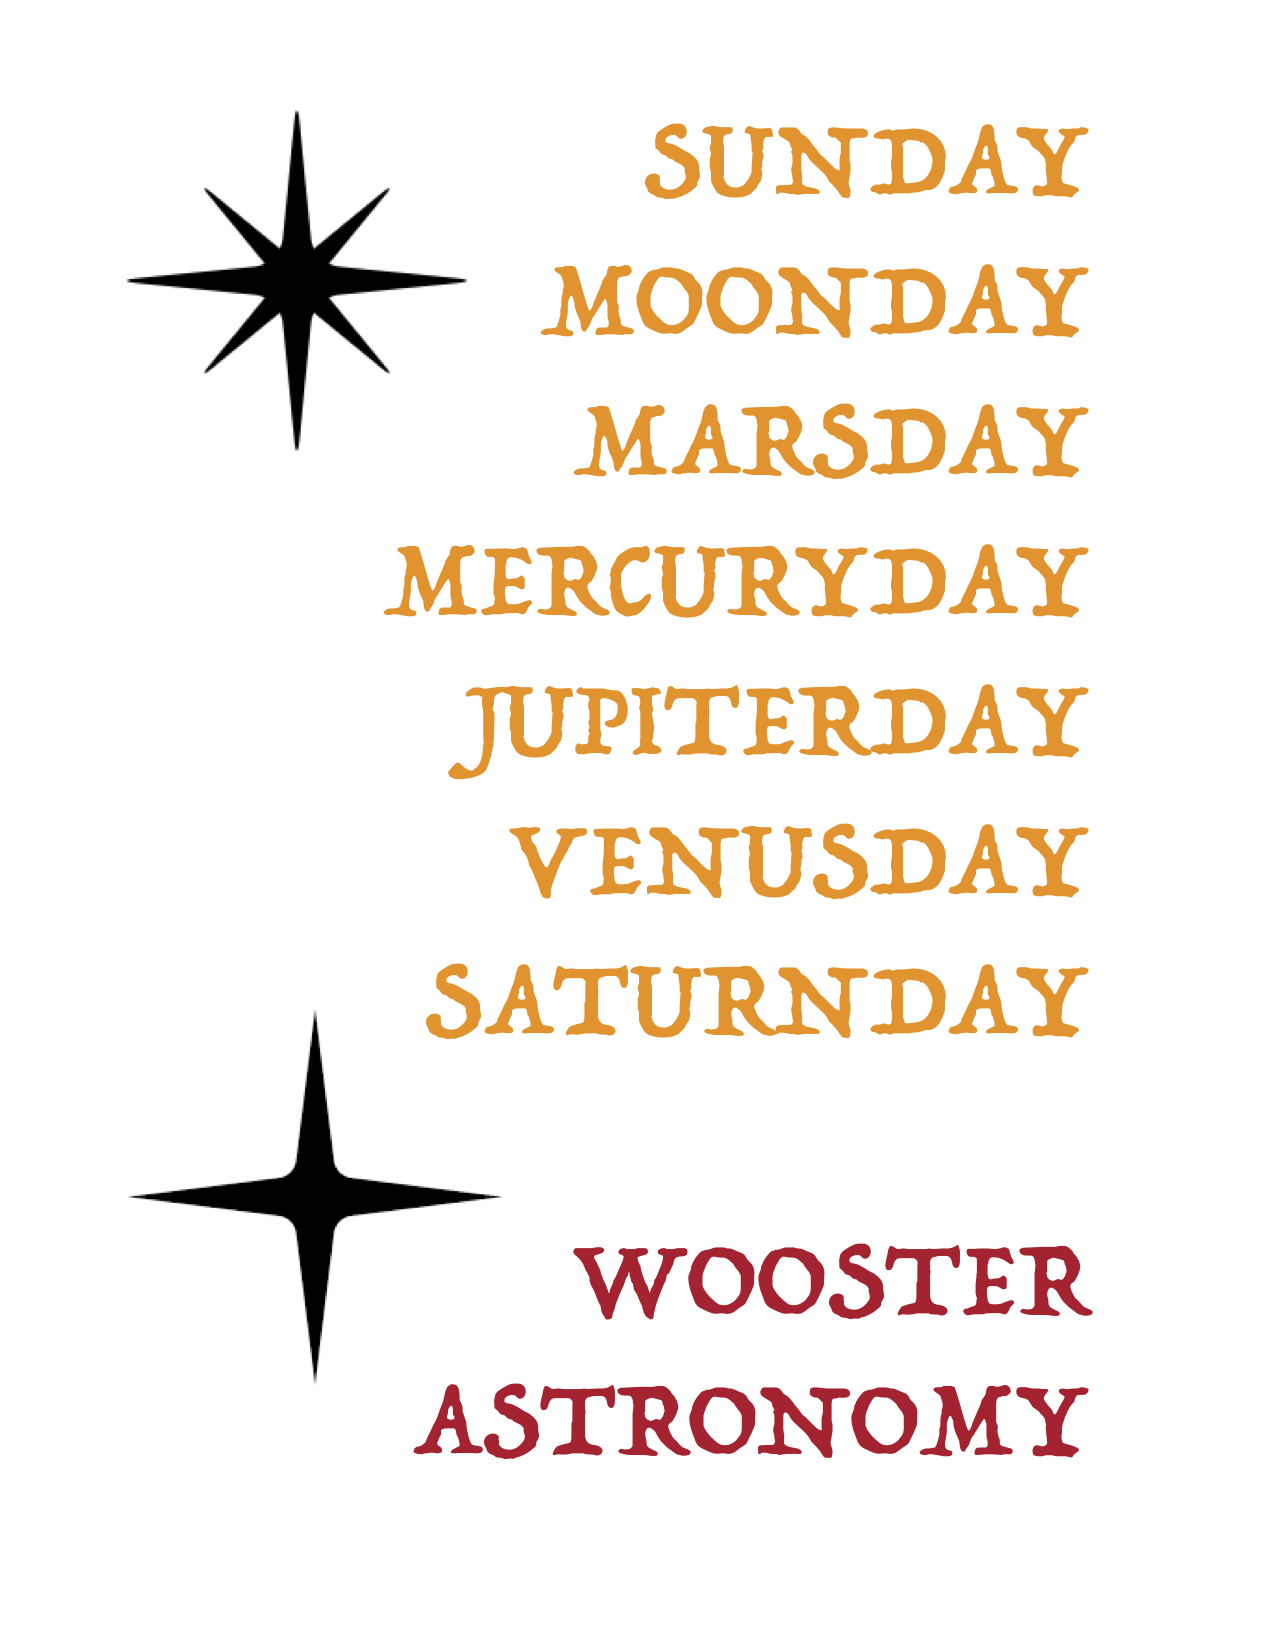 In many languages, the days of the week are named after the classic "planets"